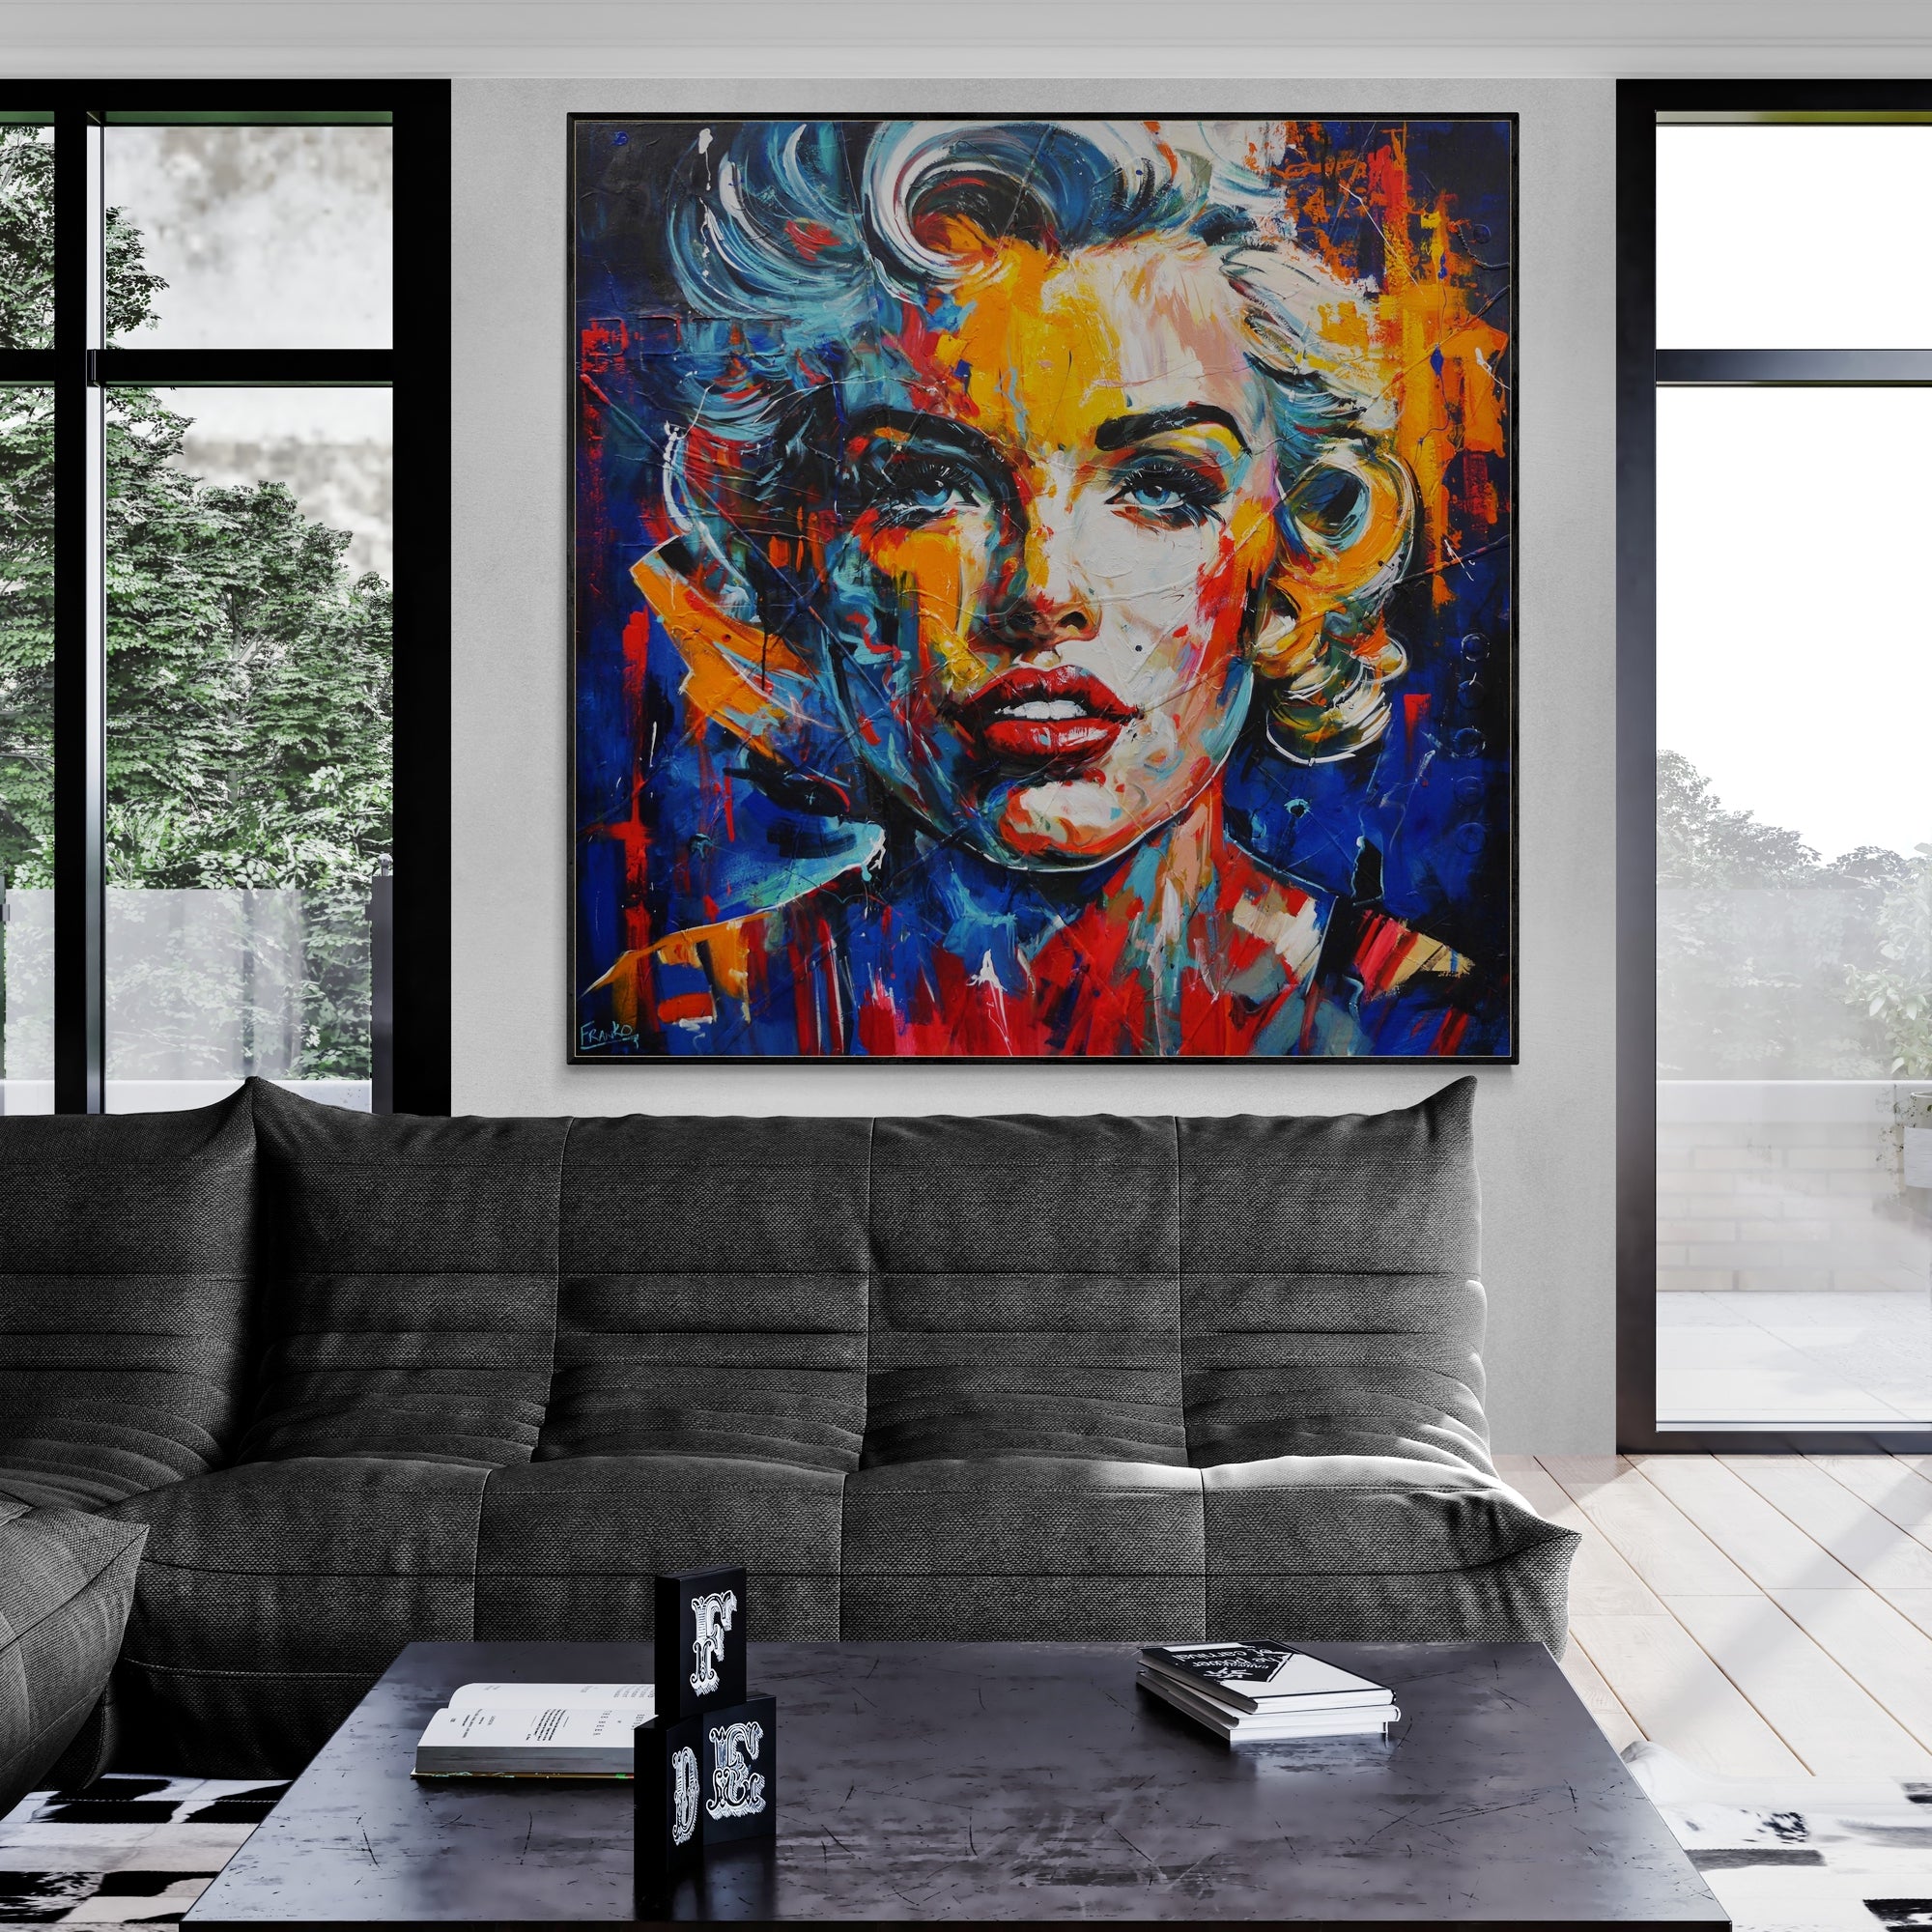 Marilyn Into The Blue 150cm x 150cm FRAMED Marilyn Monroe Abstract Realism Textured Painting (SOLD)